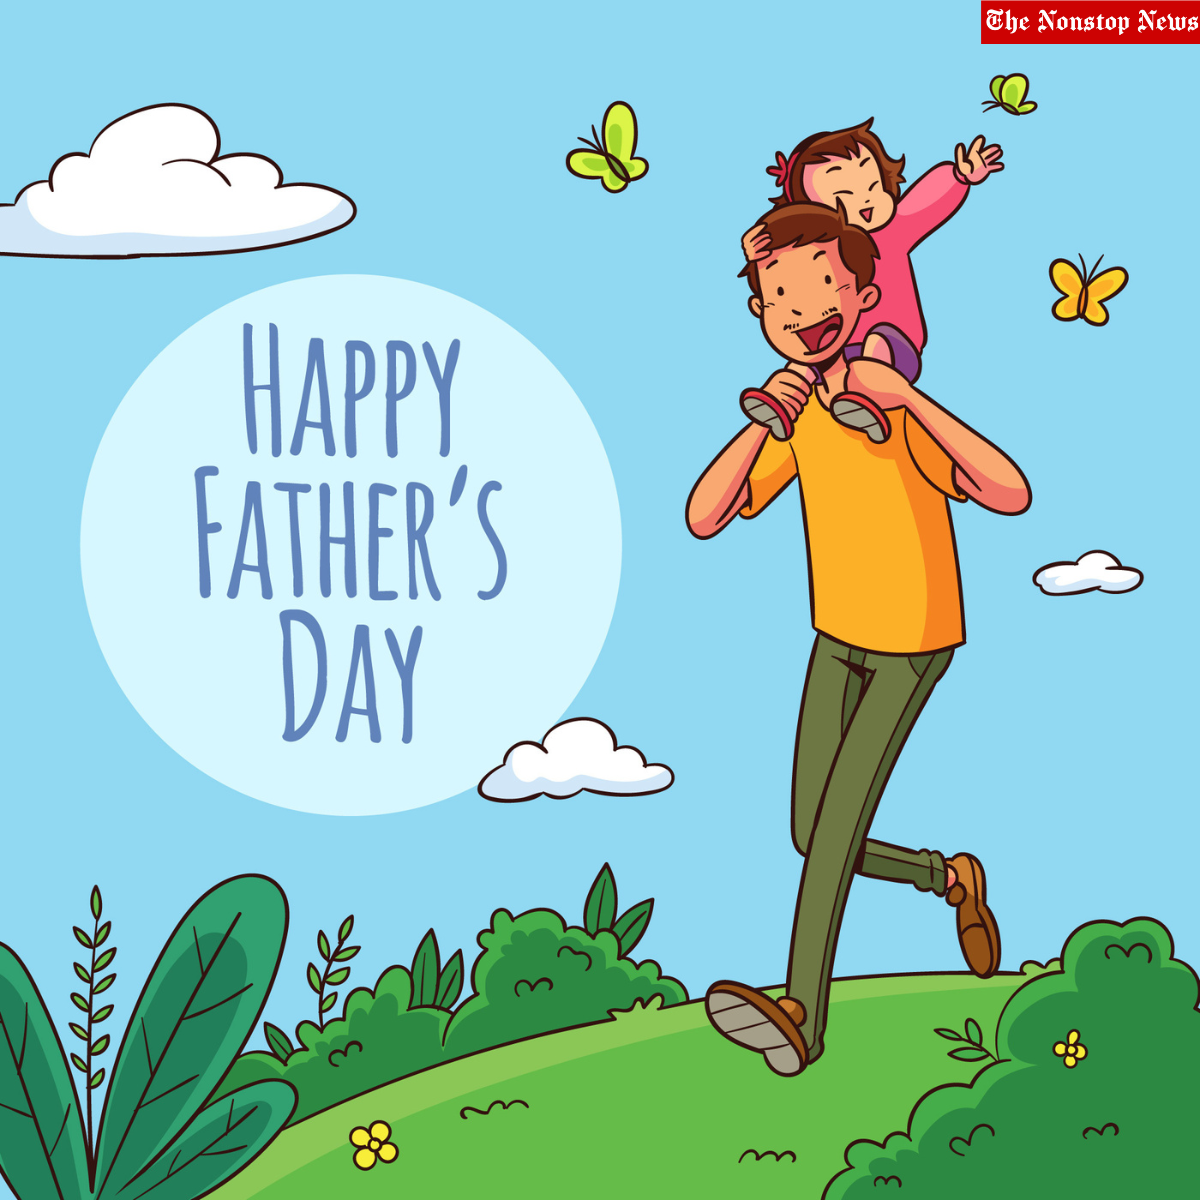 Fathers' Day 2022: Wishes, Quotes, Images, Messages, Greetings, Posters to Share